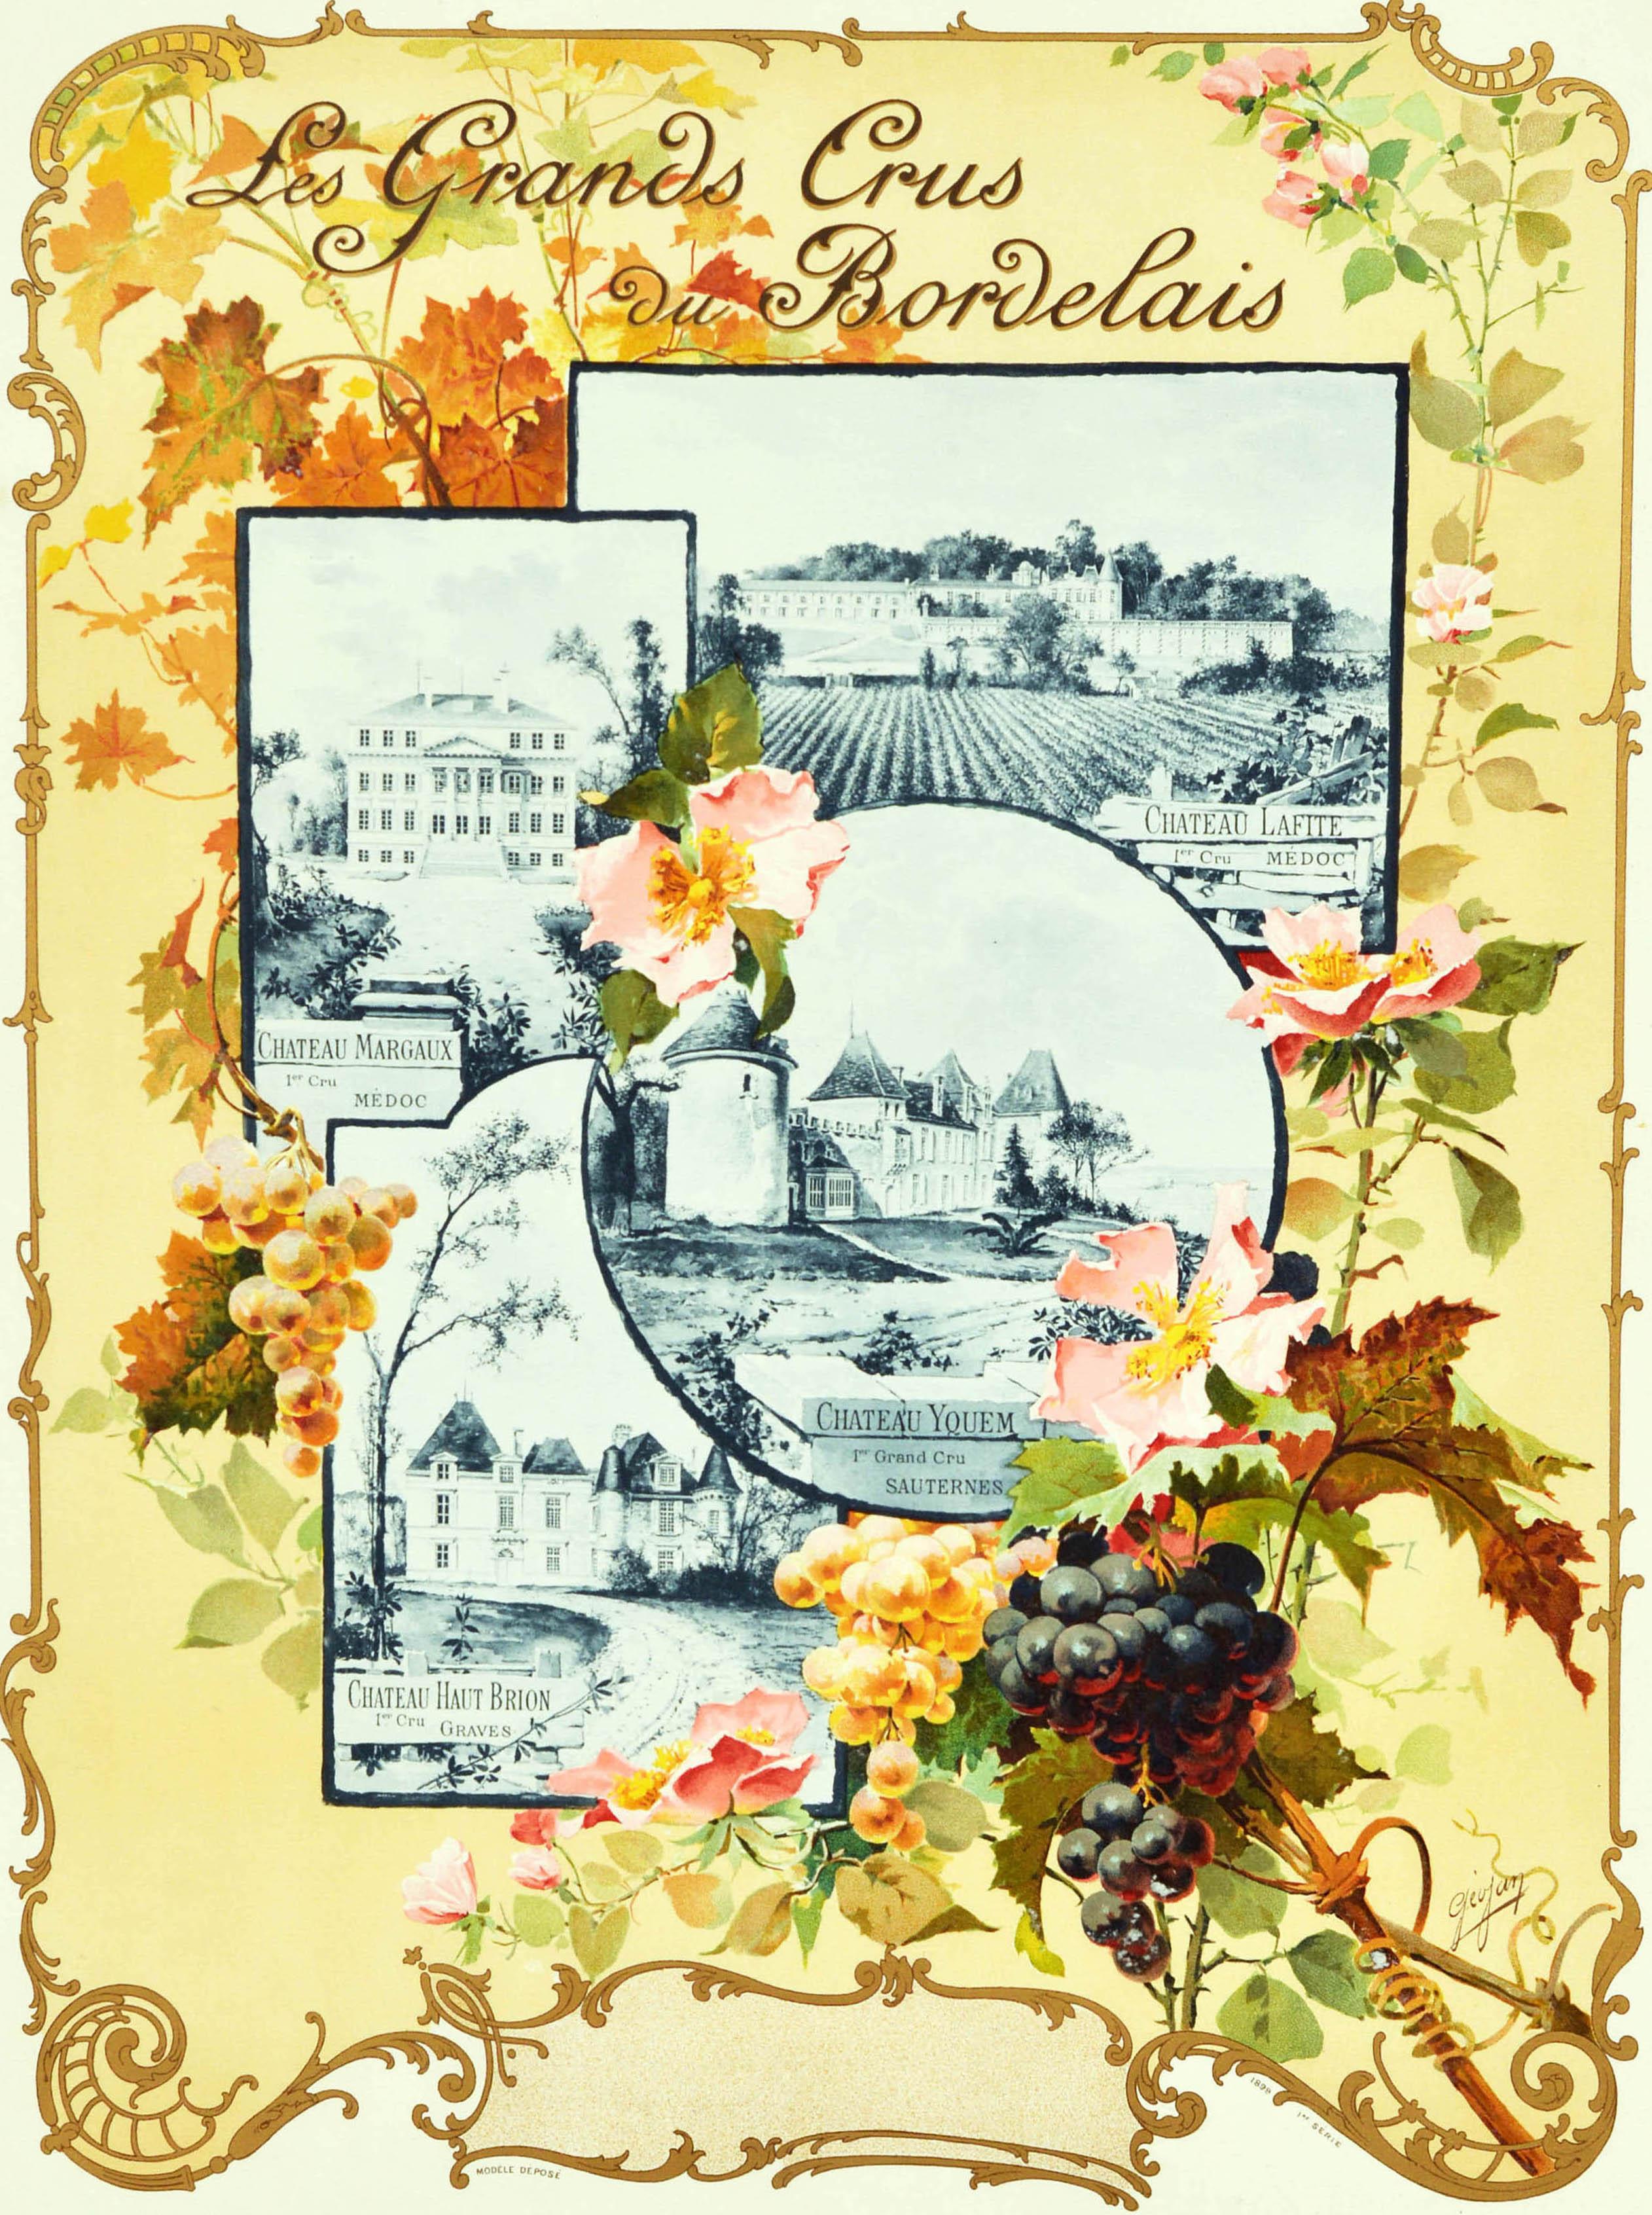 Original antique drink advertising poster for The Bordeaux Grands Crus / Les Grands Crus du Bordelais featuring black and white views of the Chateau Lafite Medoc vineyard, Chateau Margaux Medoc wine growing estate, Chateau Yquem Sauternes and